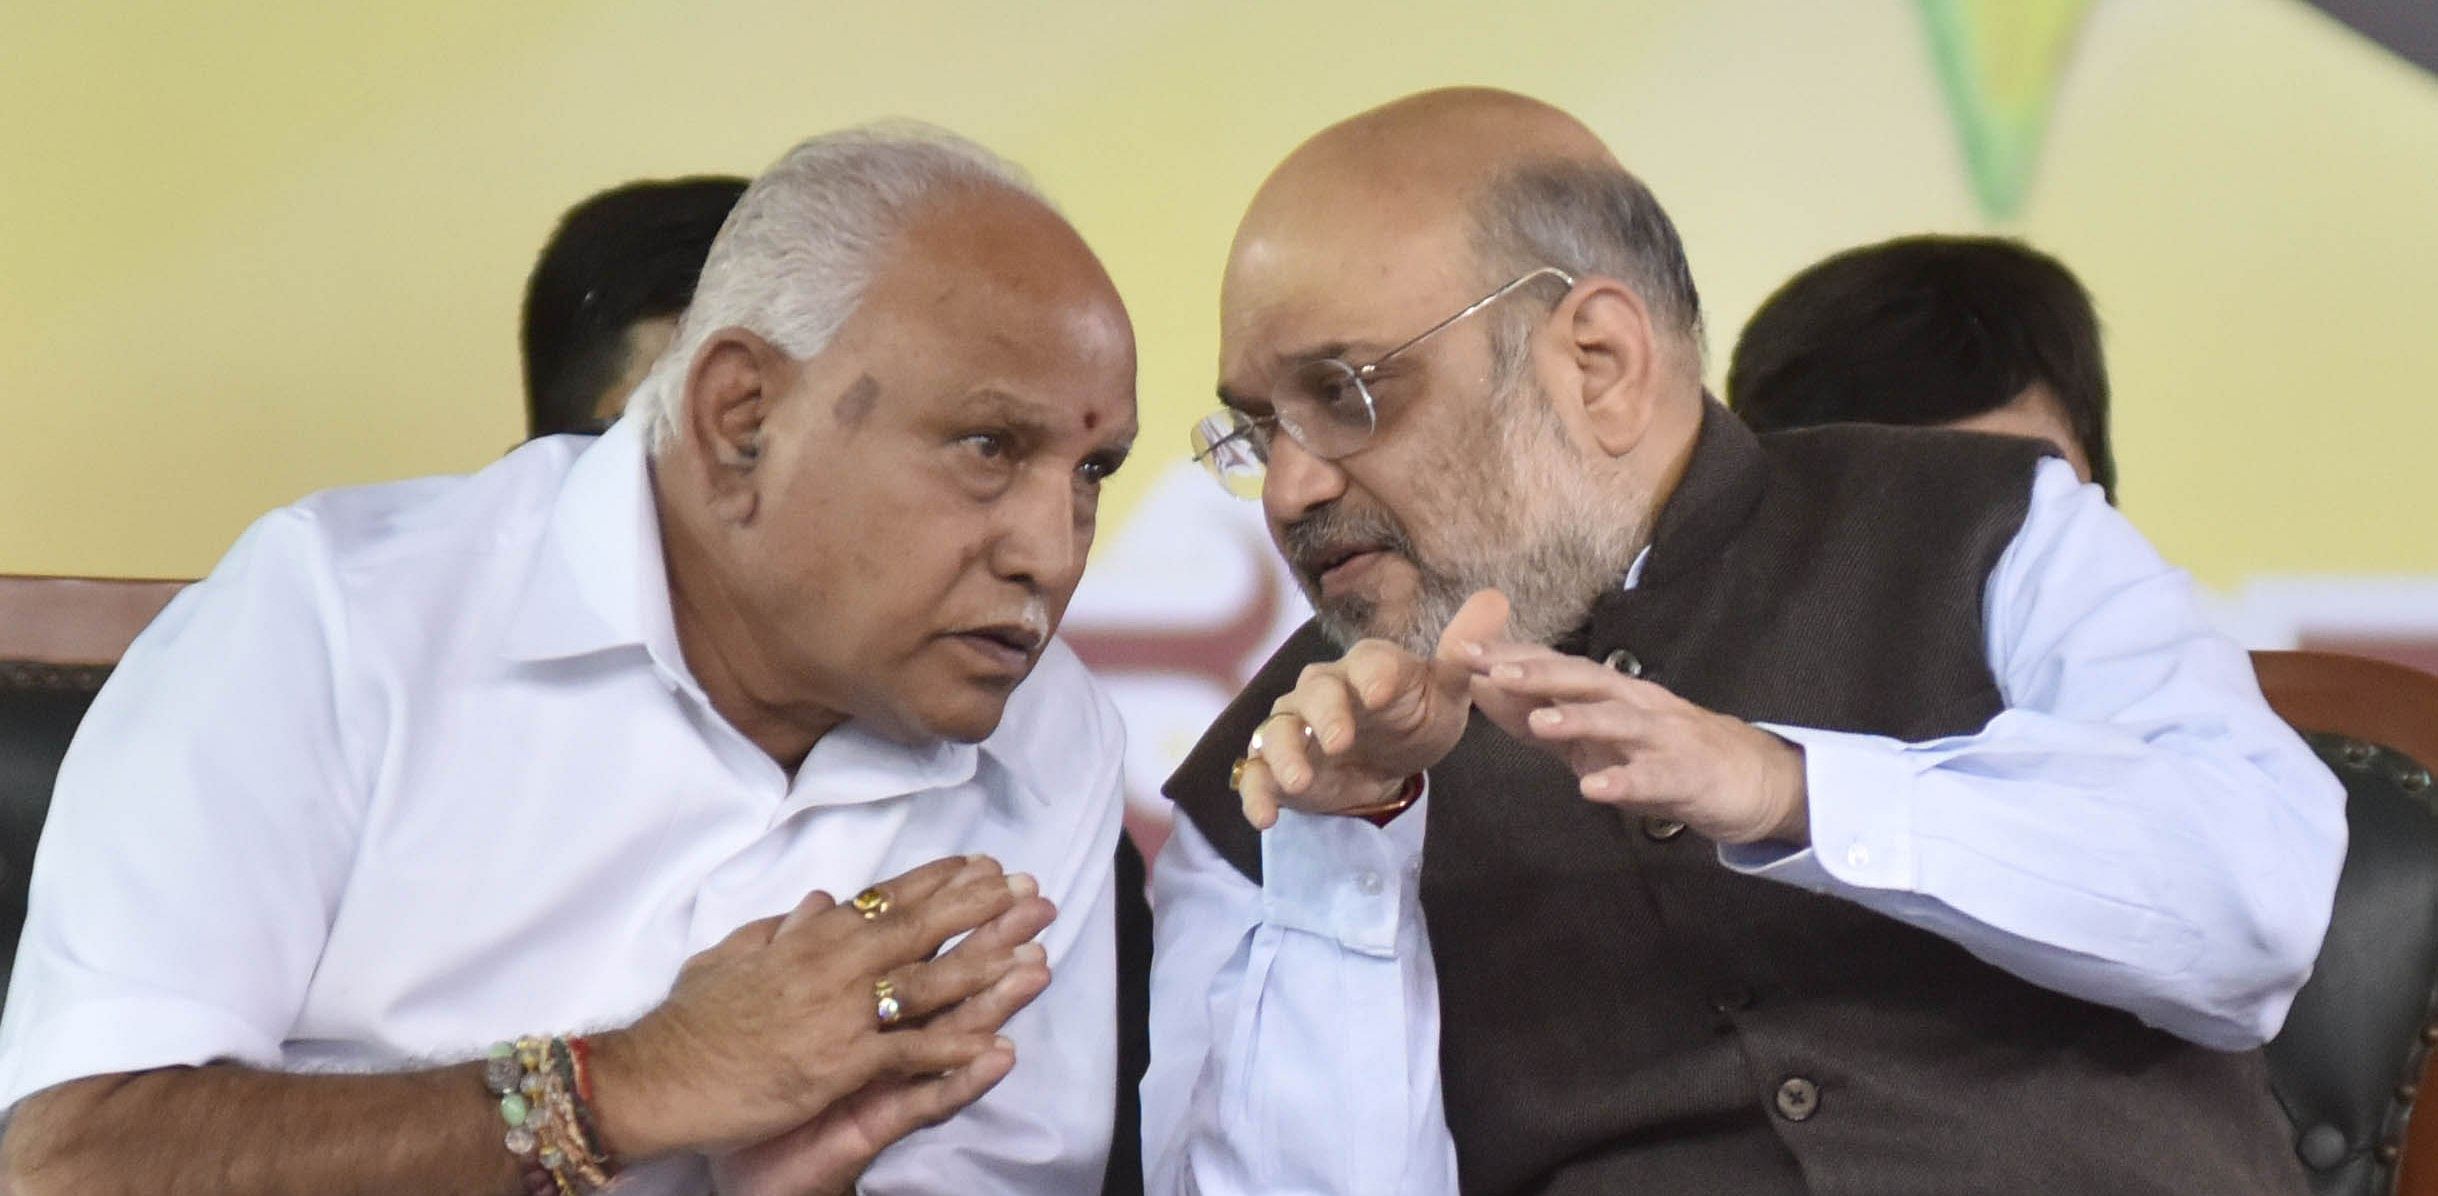 It is said that Shah told Yediyurappa that the proposal to recommend OBC status for Veerashaiva-Lingayats would need discussion within the party before any decision is made. Credit: DH File Photo